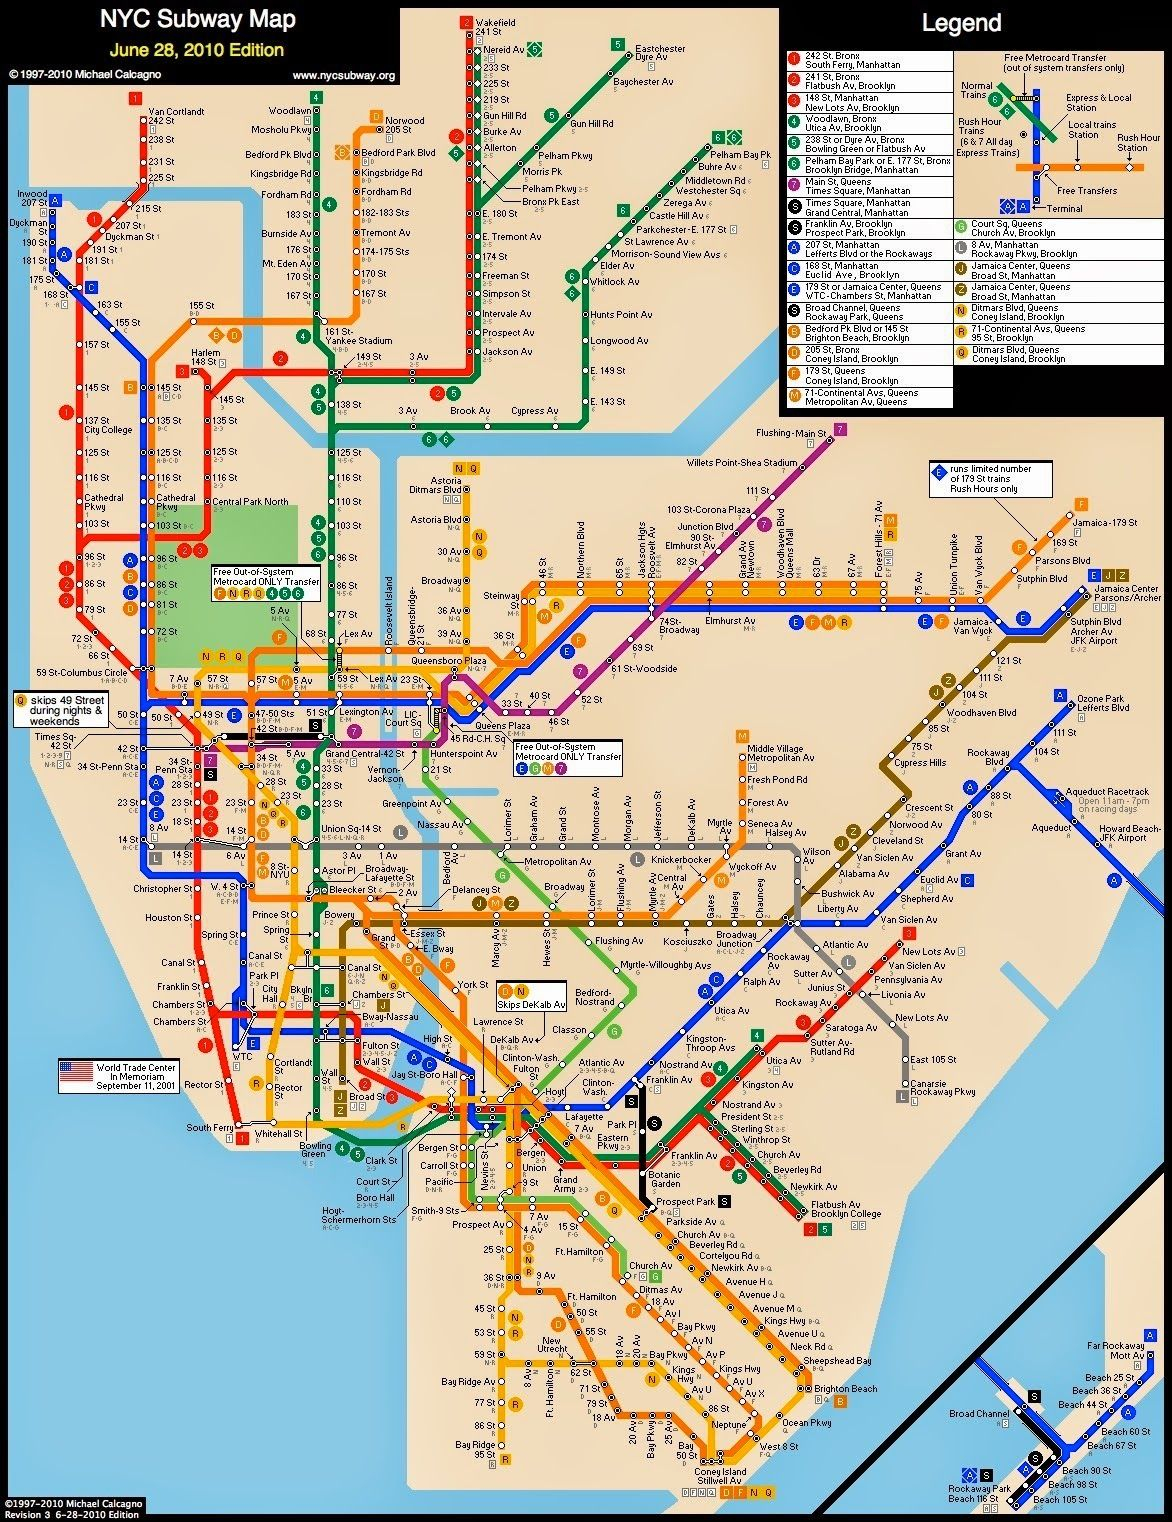 Subway Map Of Manhattan And All Of NYC Nyc Subway Map 